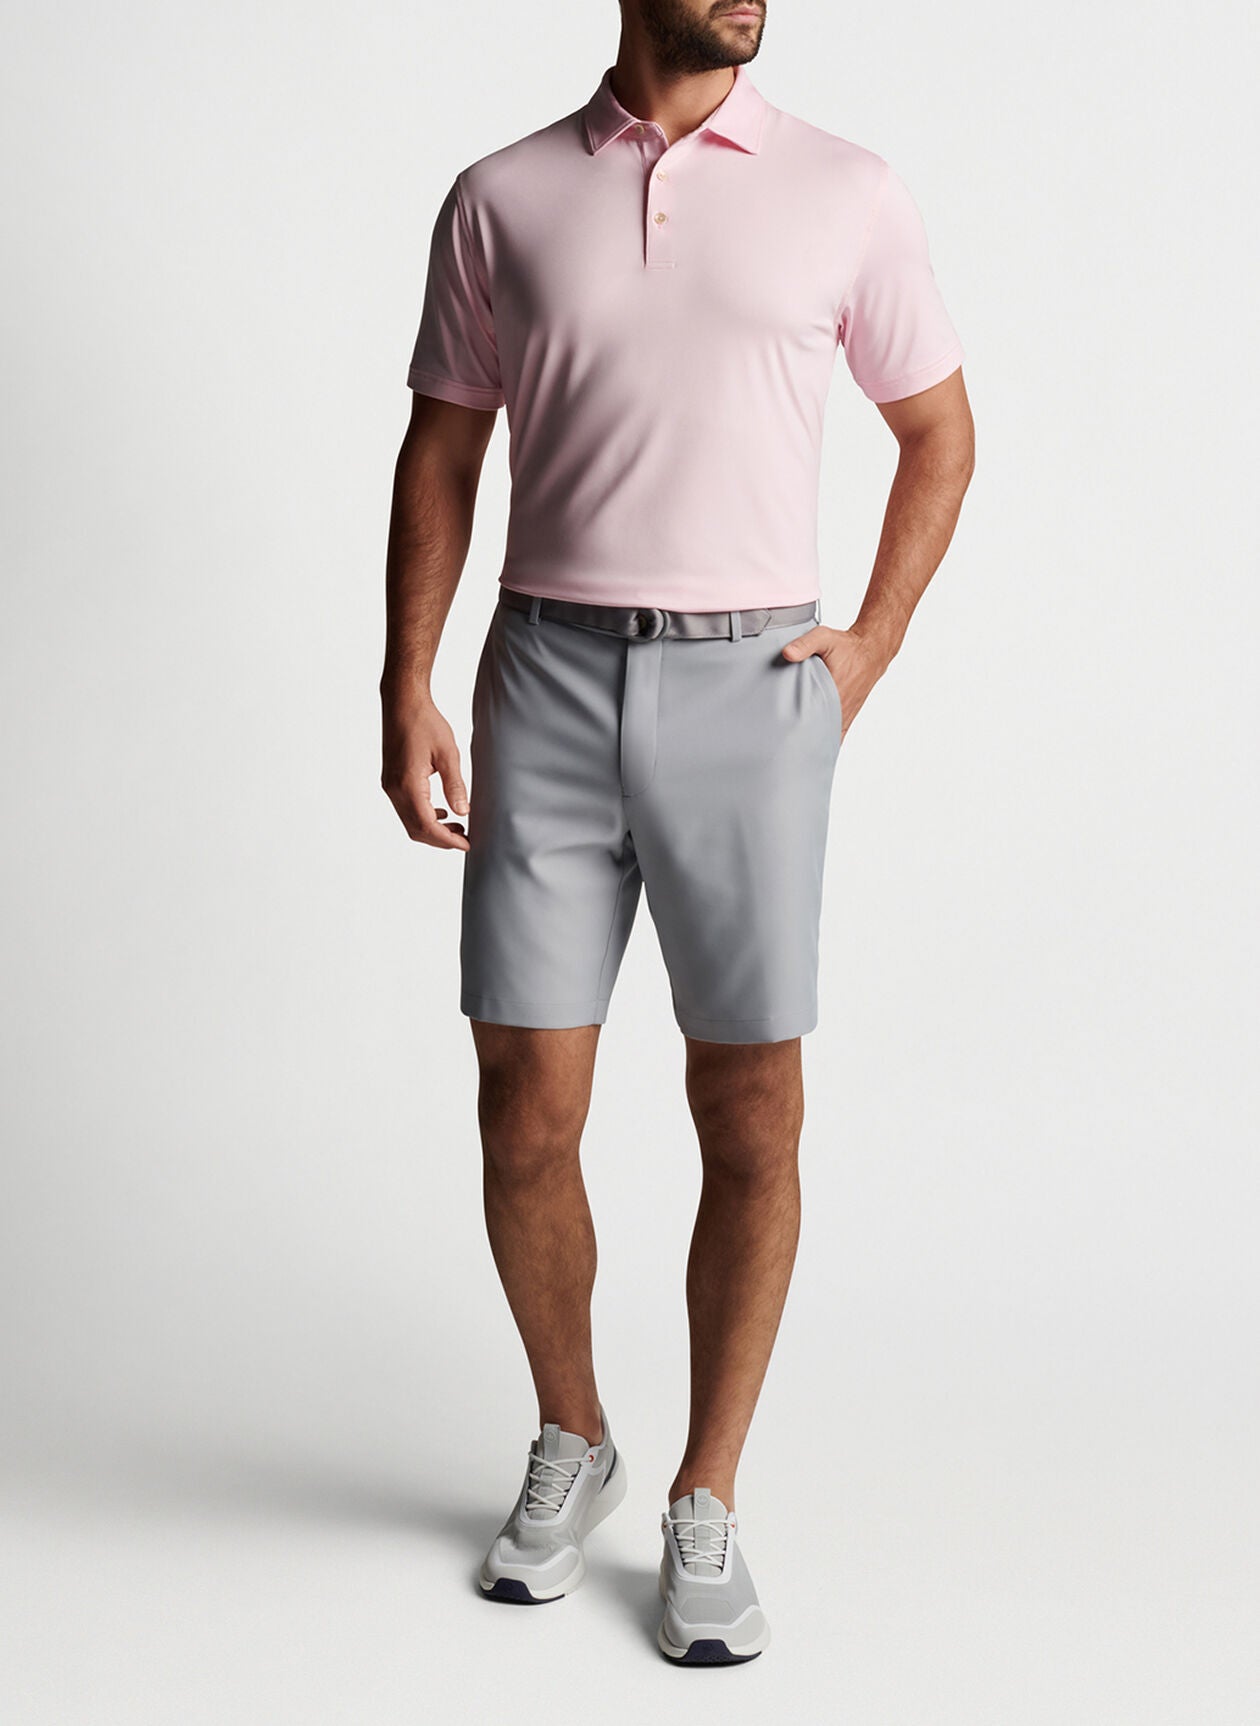 Solid Performance Jersey Polo (Sean Self Collar)- Palmer Pink